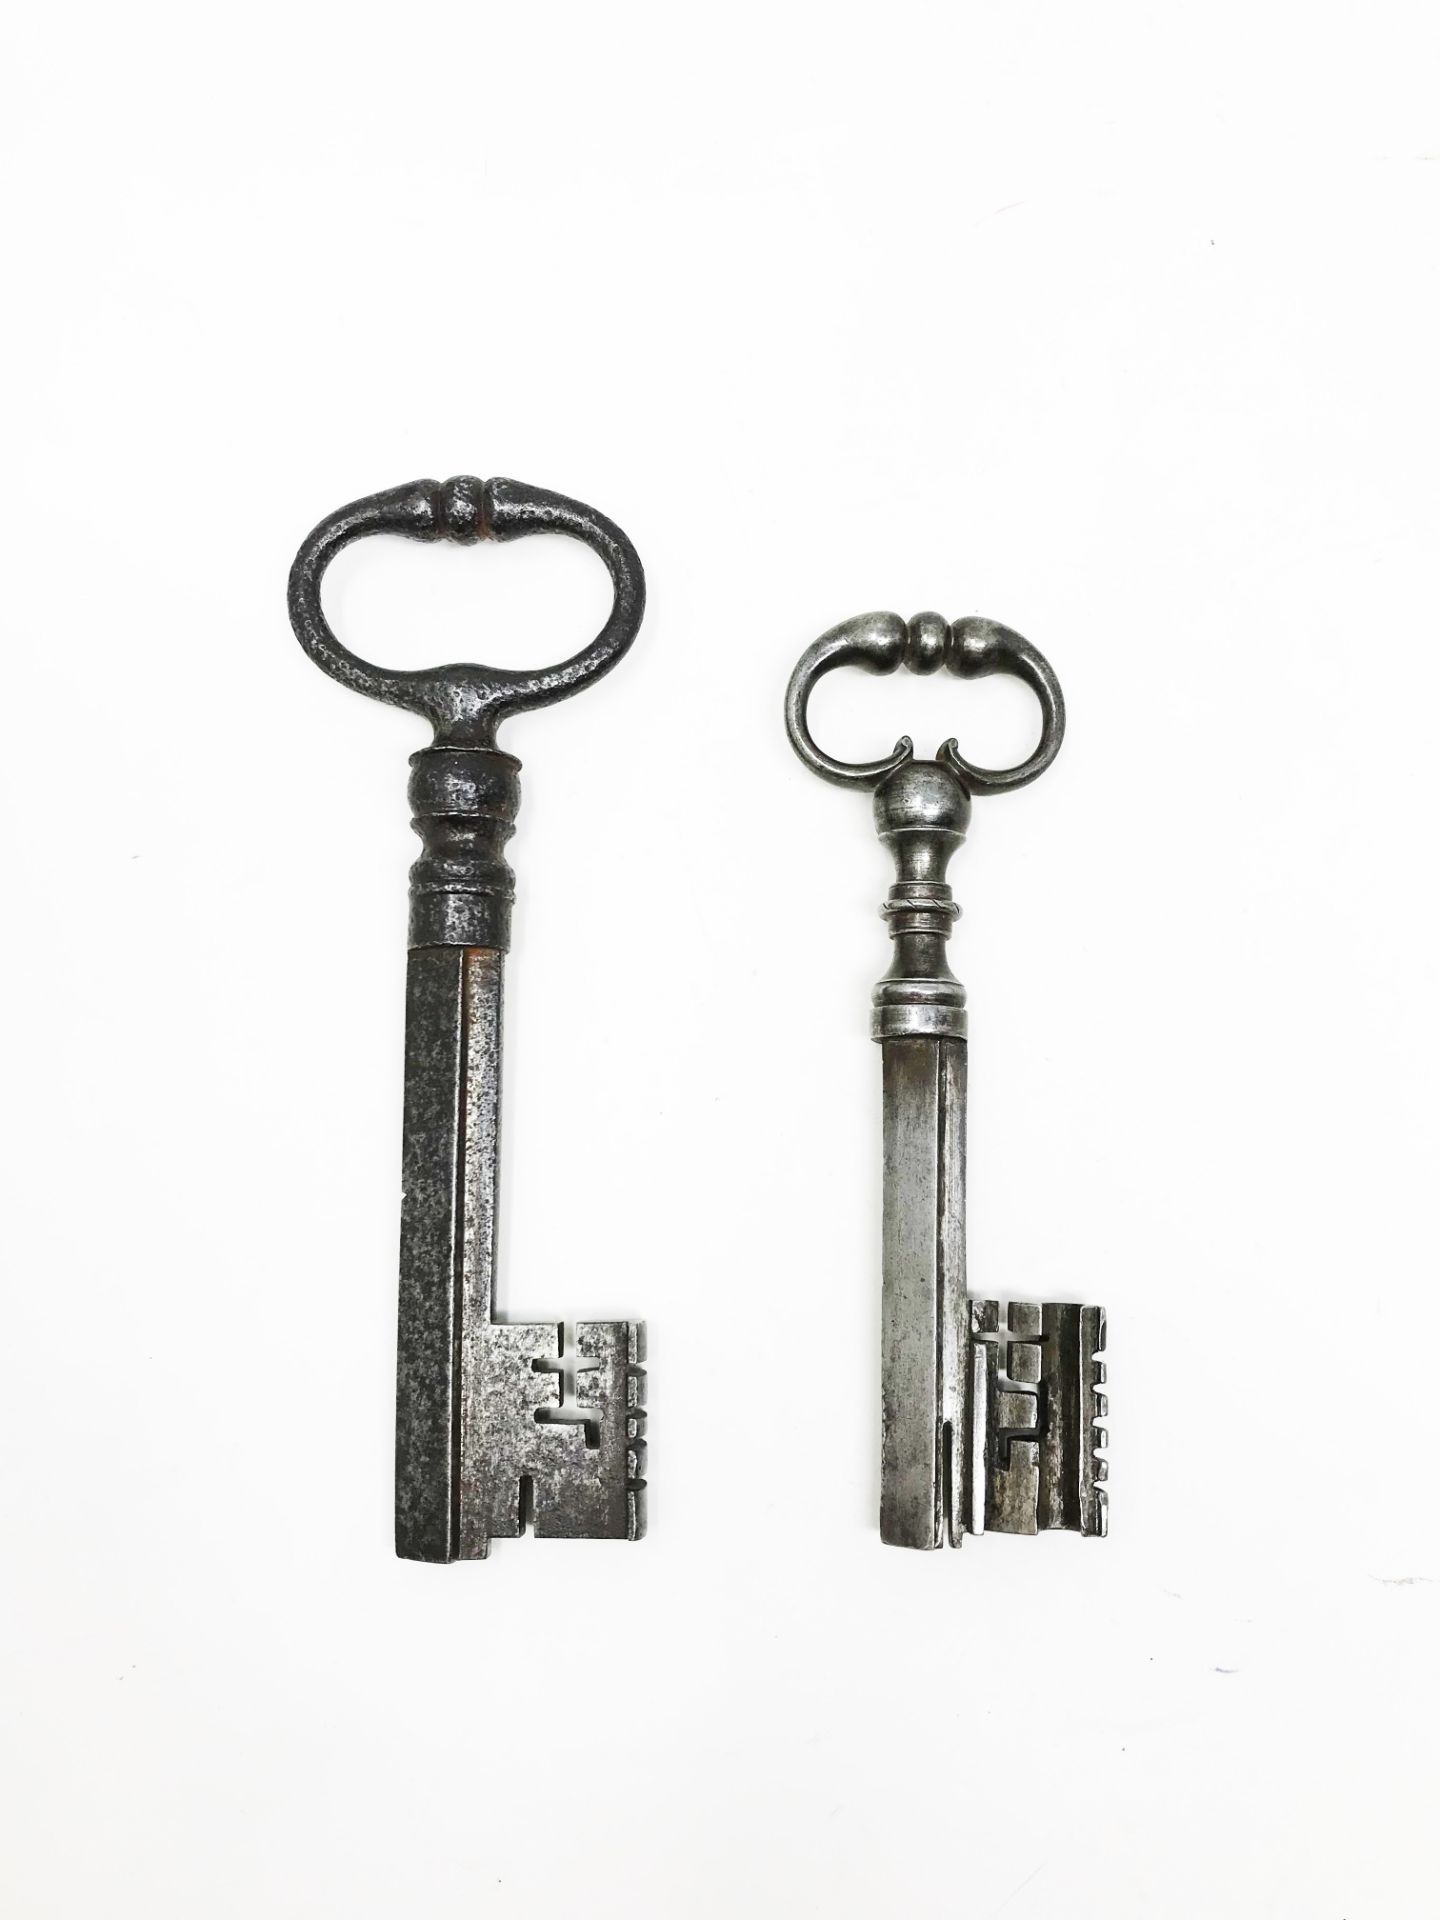 Two keys with frog's legs rings16, 9 - 14, 35 cm Part of the chapter "From Enlightenment to - Image 2 of 2